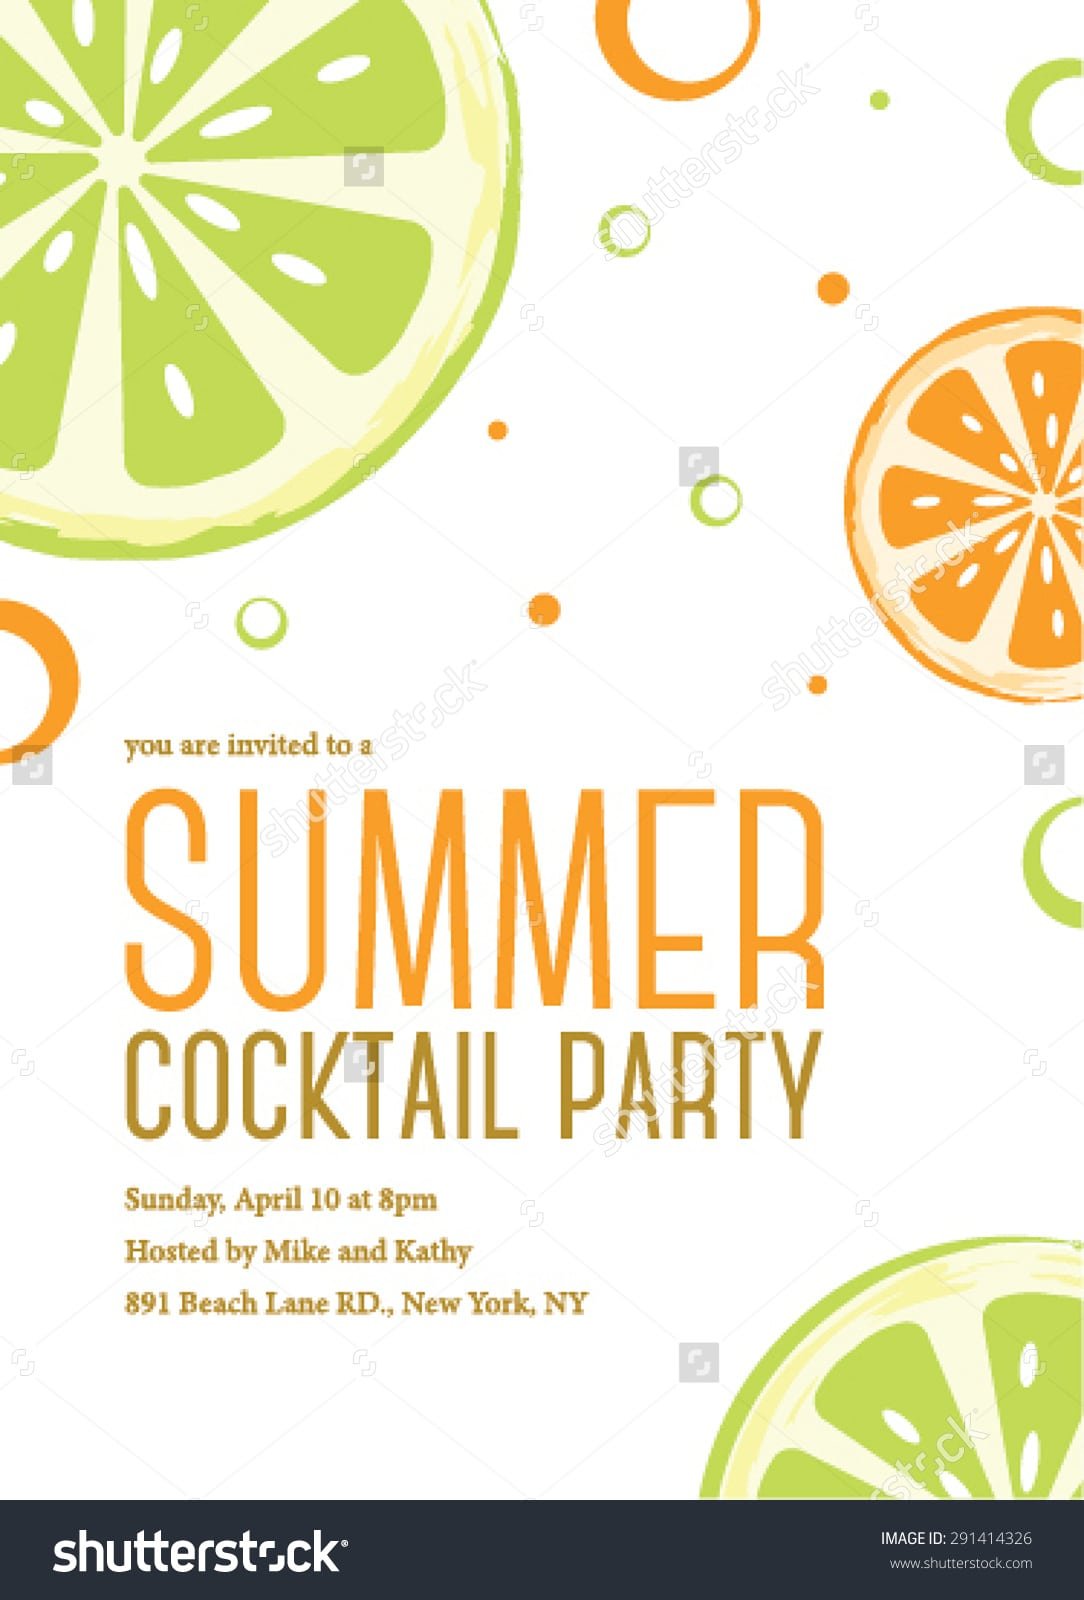 Summer Cocktail Party Invitation Template Stock Vector 291414326